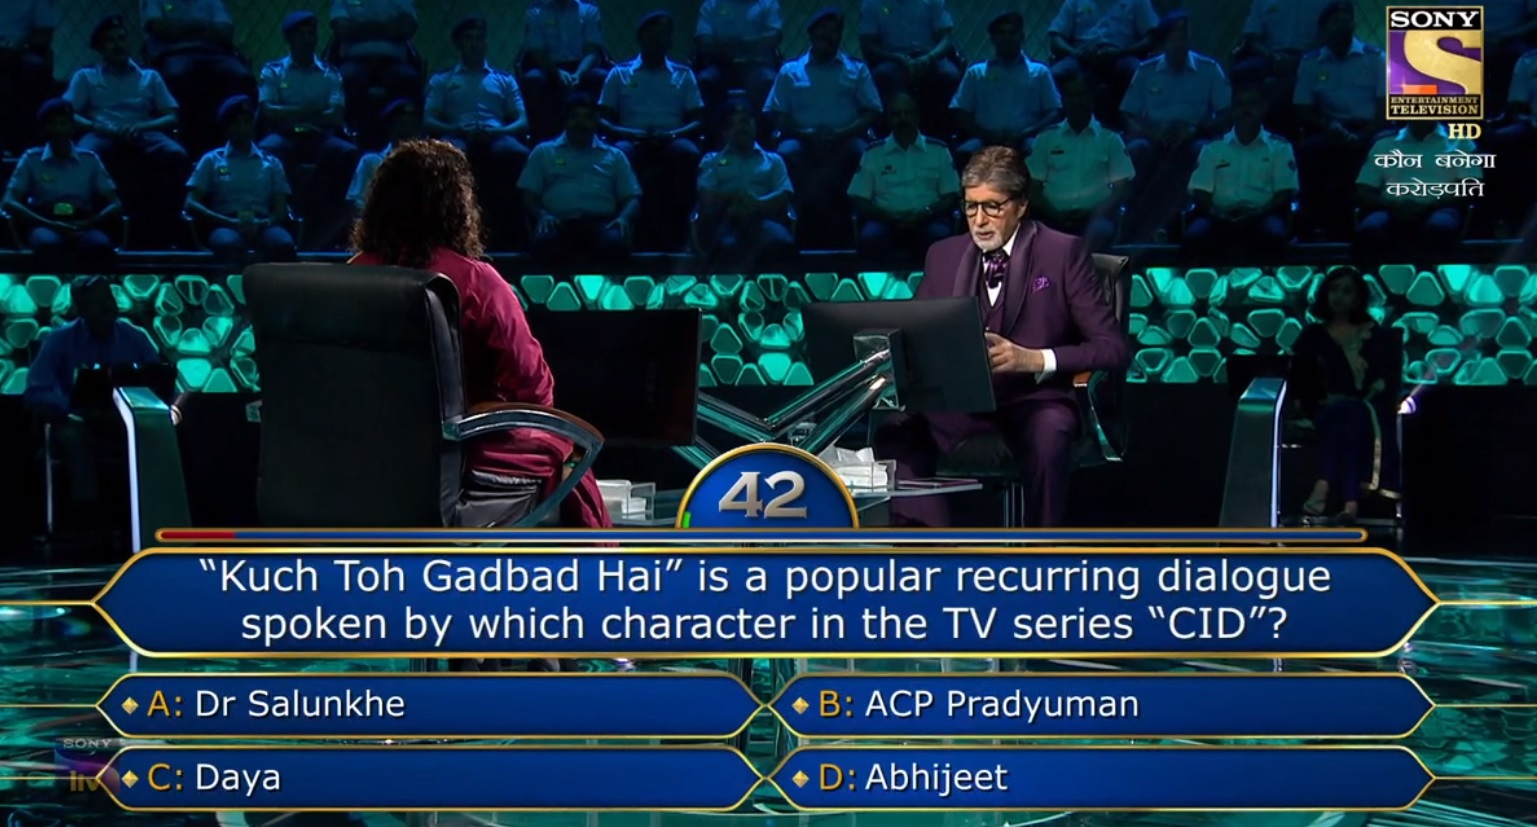 Ques : “Kuch Toh Gadbad Hai” is a popular recurring dialogue spoken by which character in the TV series “CID”?